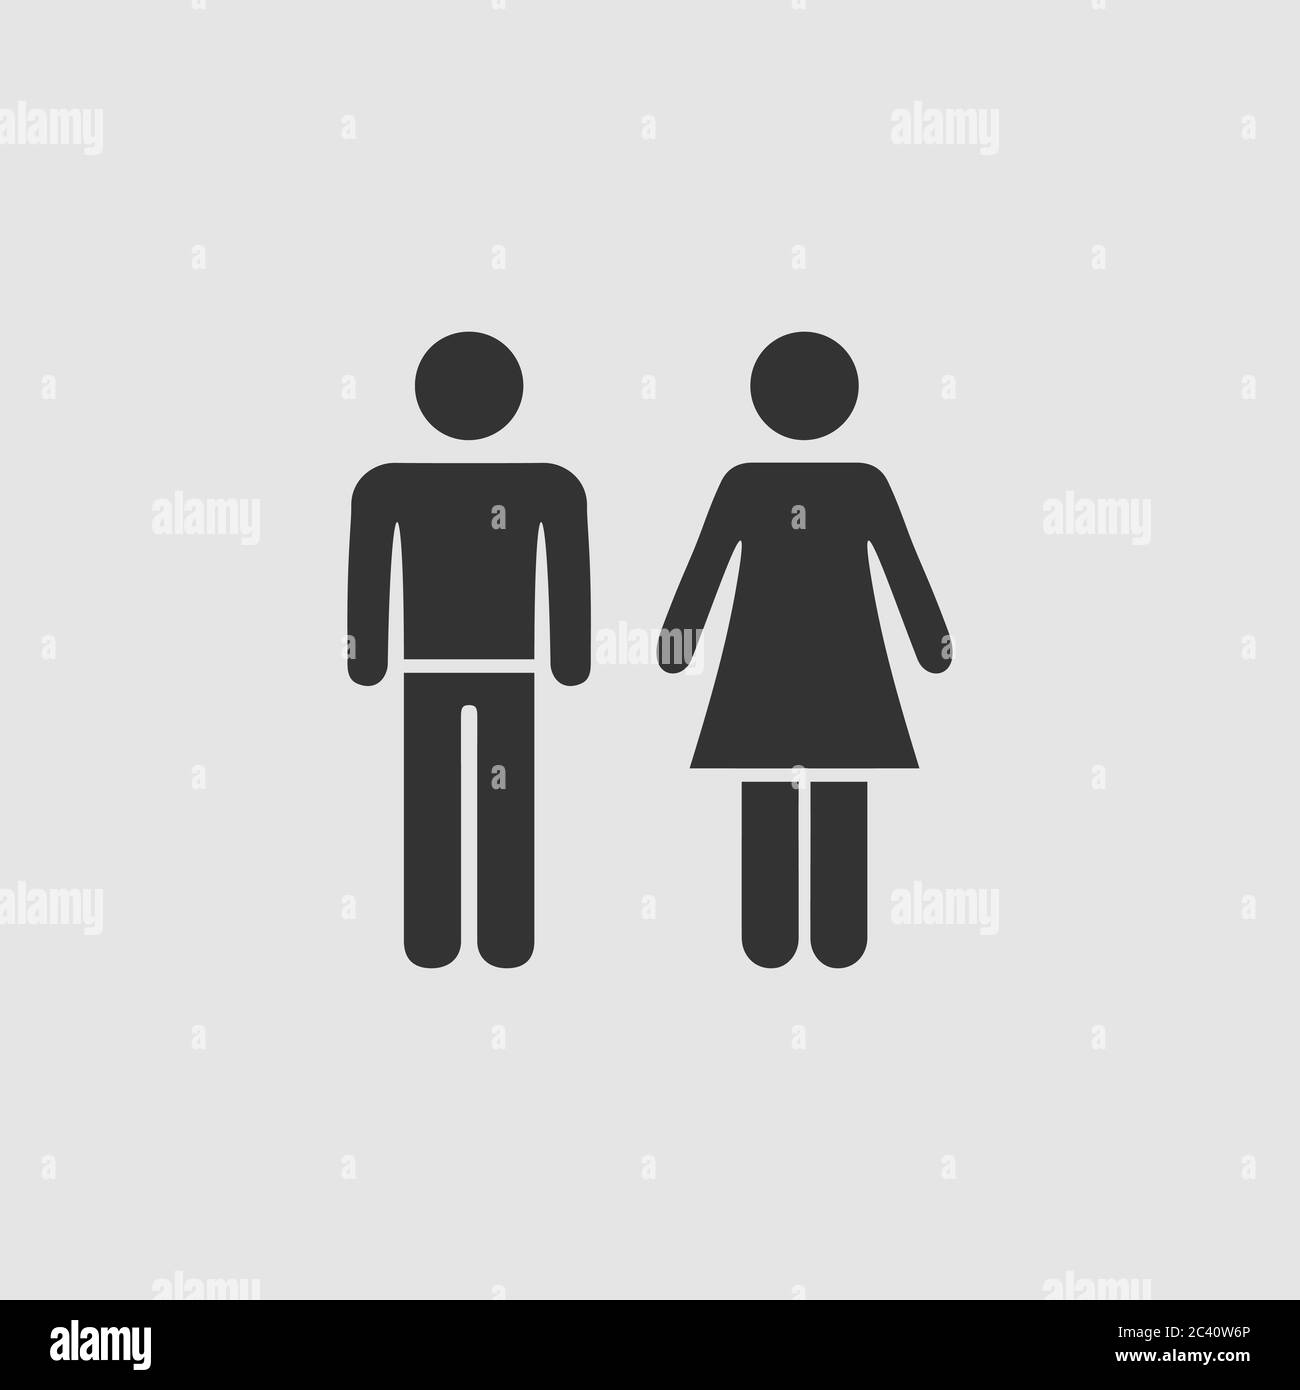 Man and woman icon flat. Black pictogram on grey background. Vector illustration symbol Stock Vector